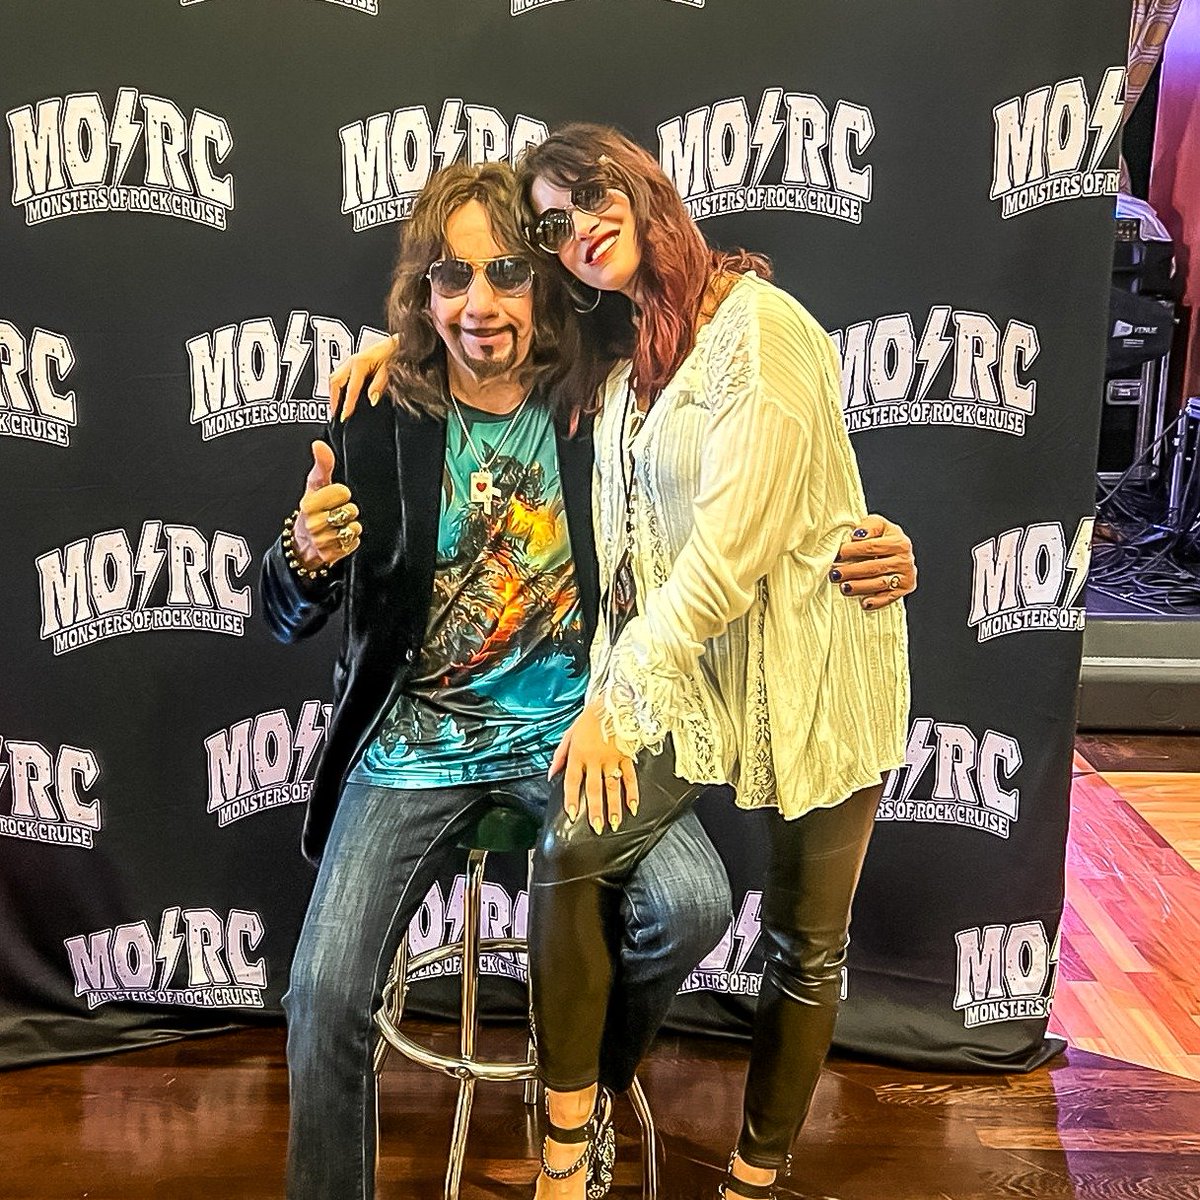 Un poco de Ace Frehley en el Monsters of Rock Cruise!!!

#KISS #TheKissinTime #AceFrehley #MonstersOfRockCruise